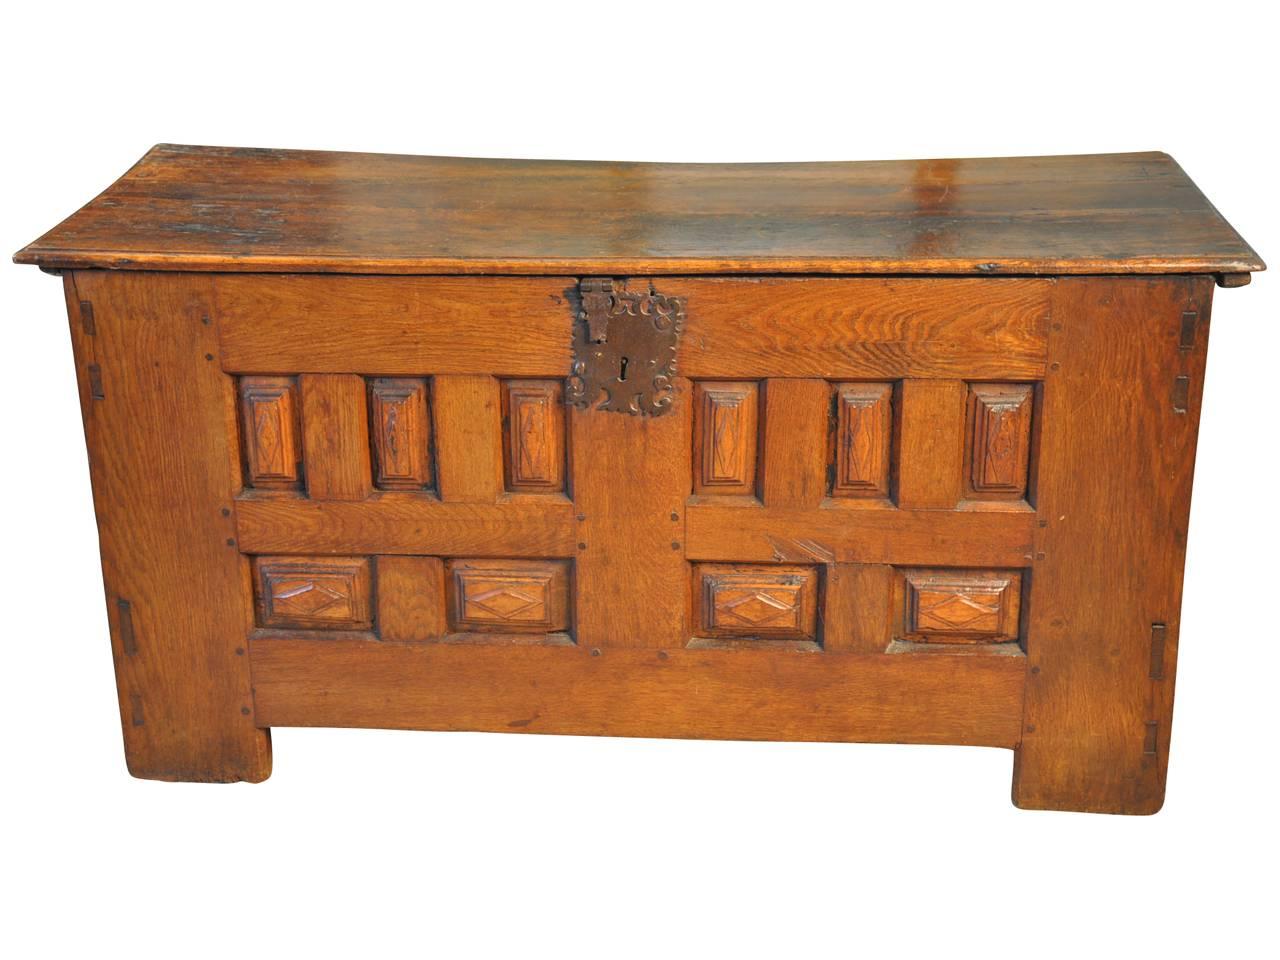 A very handsome French Louis XIII style trunk or coffer constructed from richly stained oak. A great storage piece. Wonderful under a picture window, at the foot of a bed or as a low sofa table.